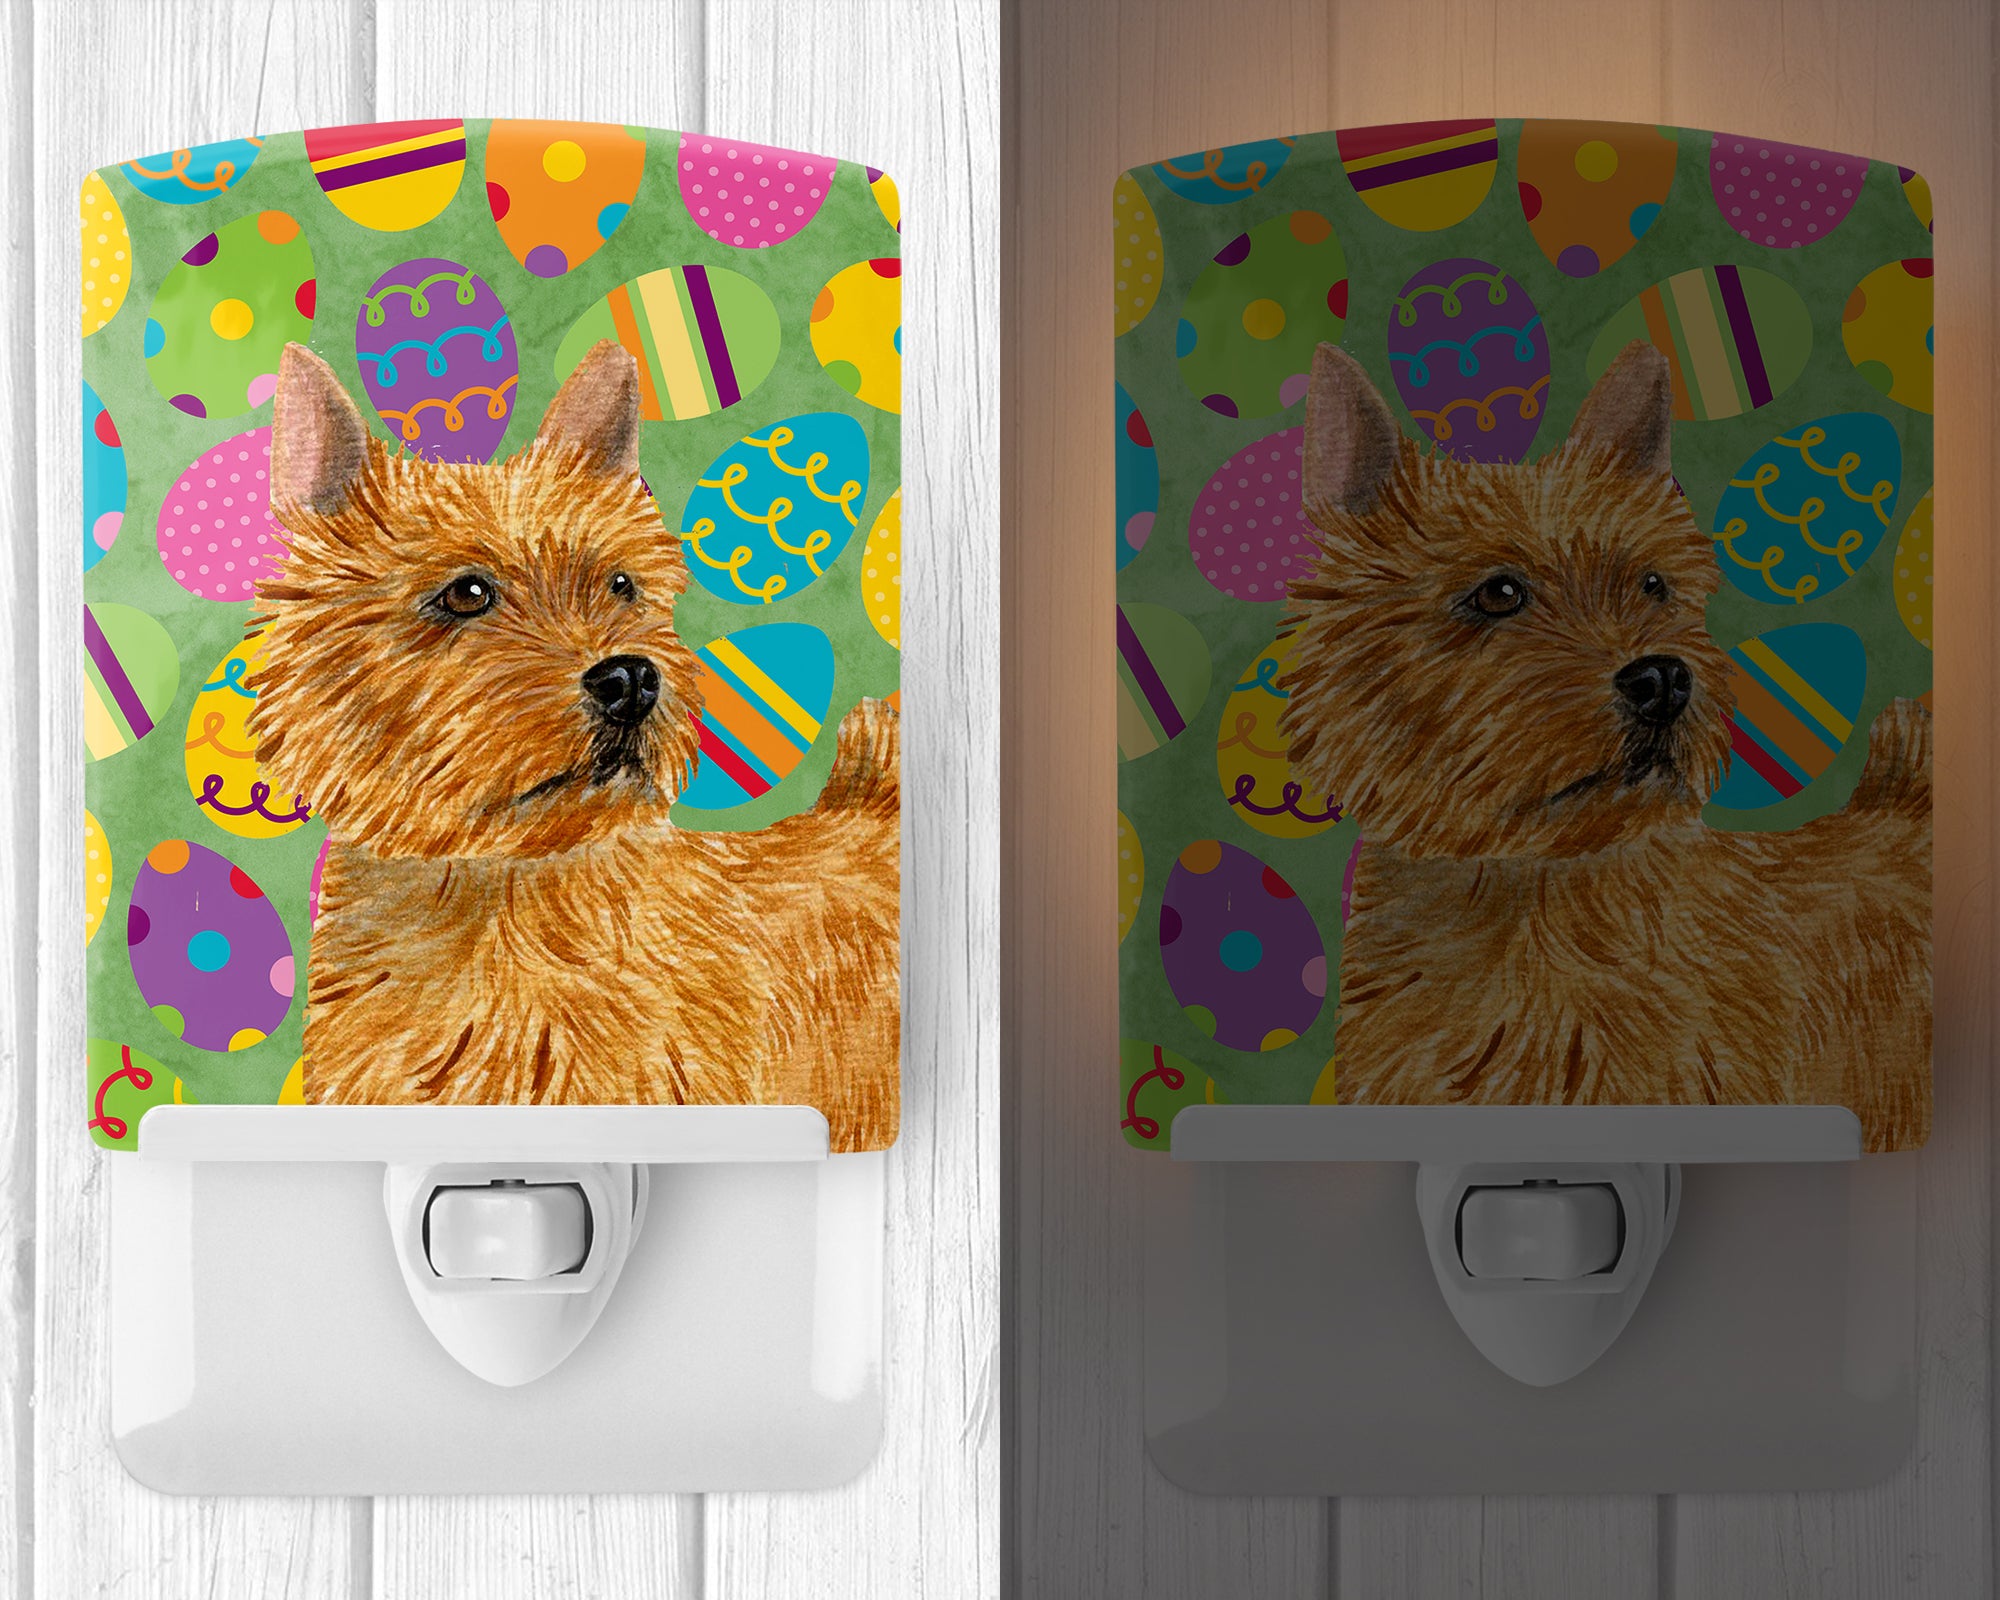 Norwich Terrier Easter Eggtravaganza Ceramic Night Light SS4844CNL - the-store.com